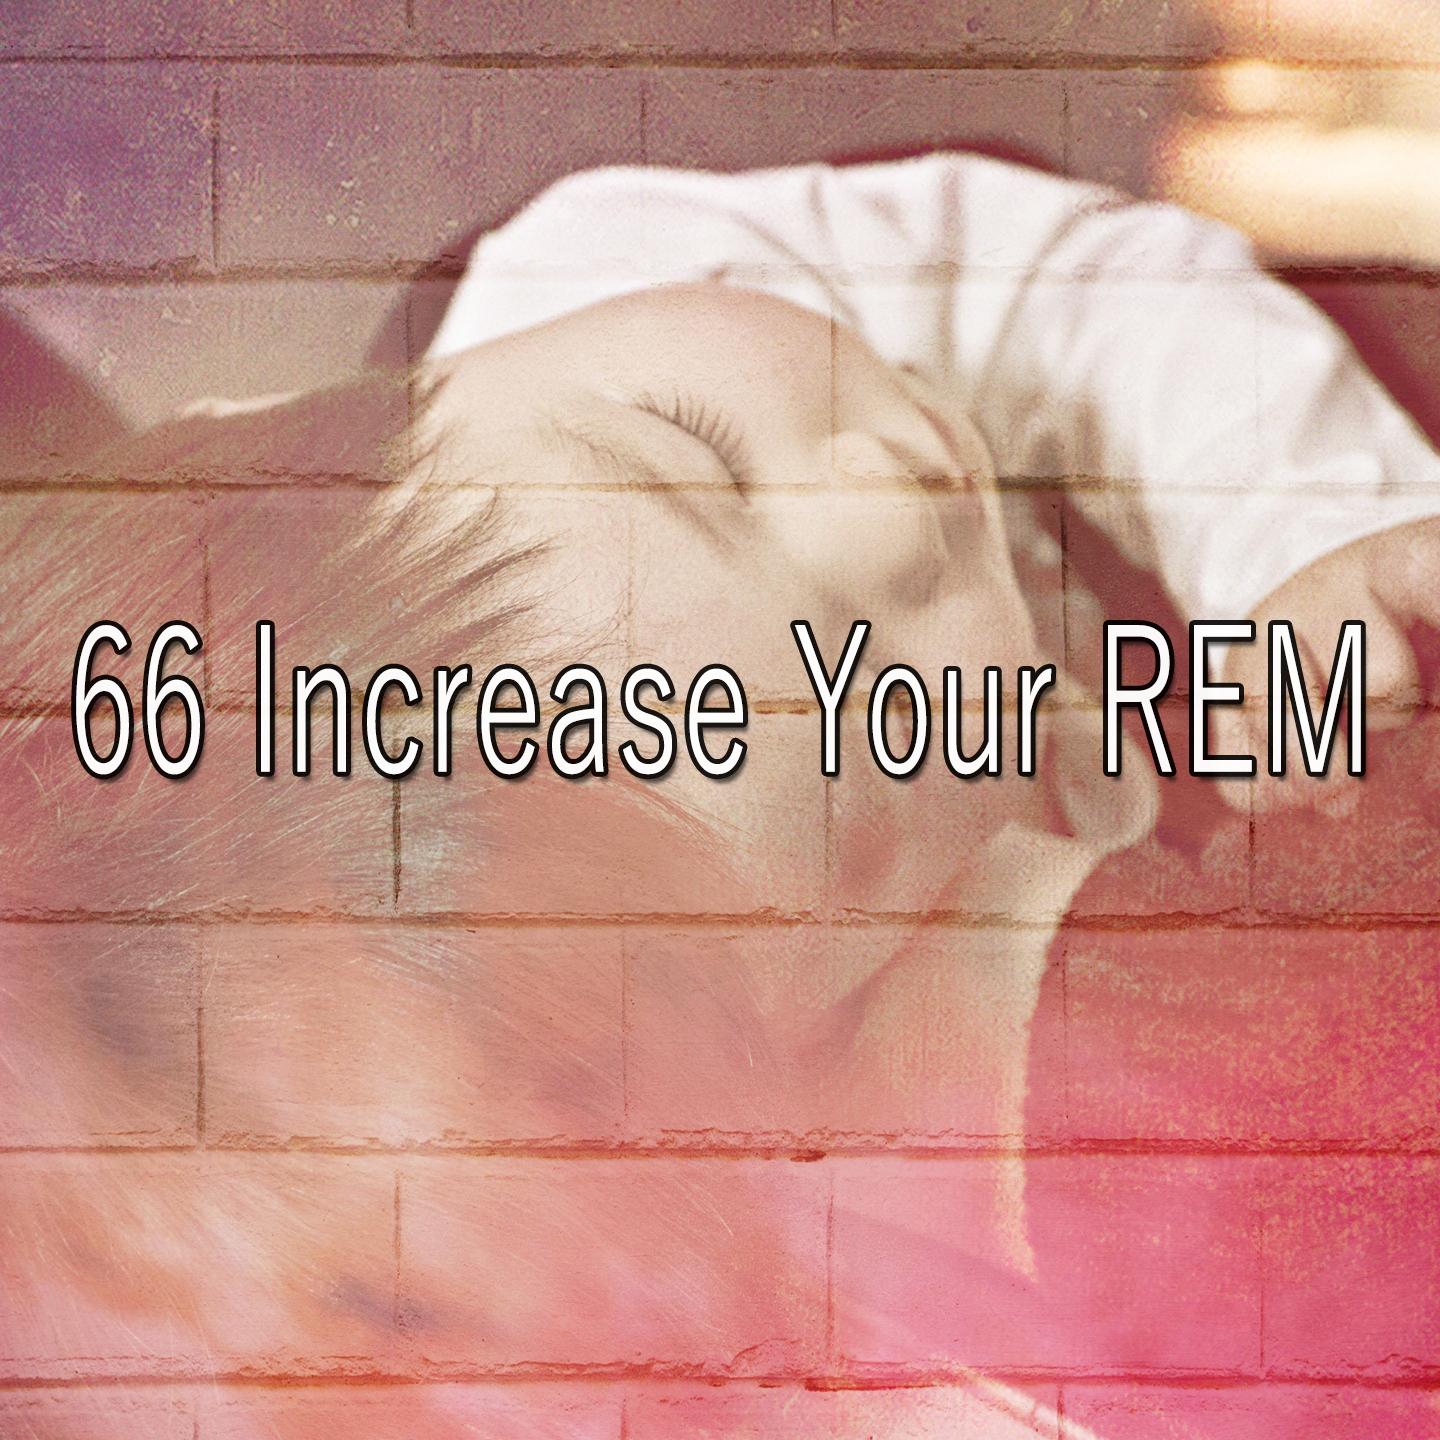 66 Increase Your Rem